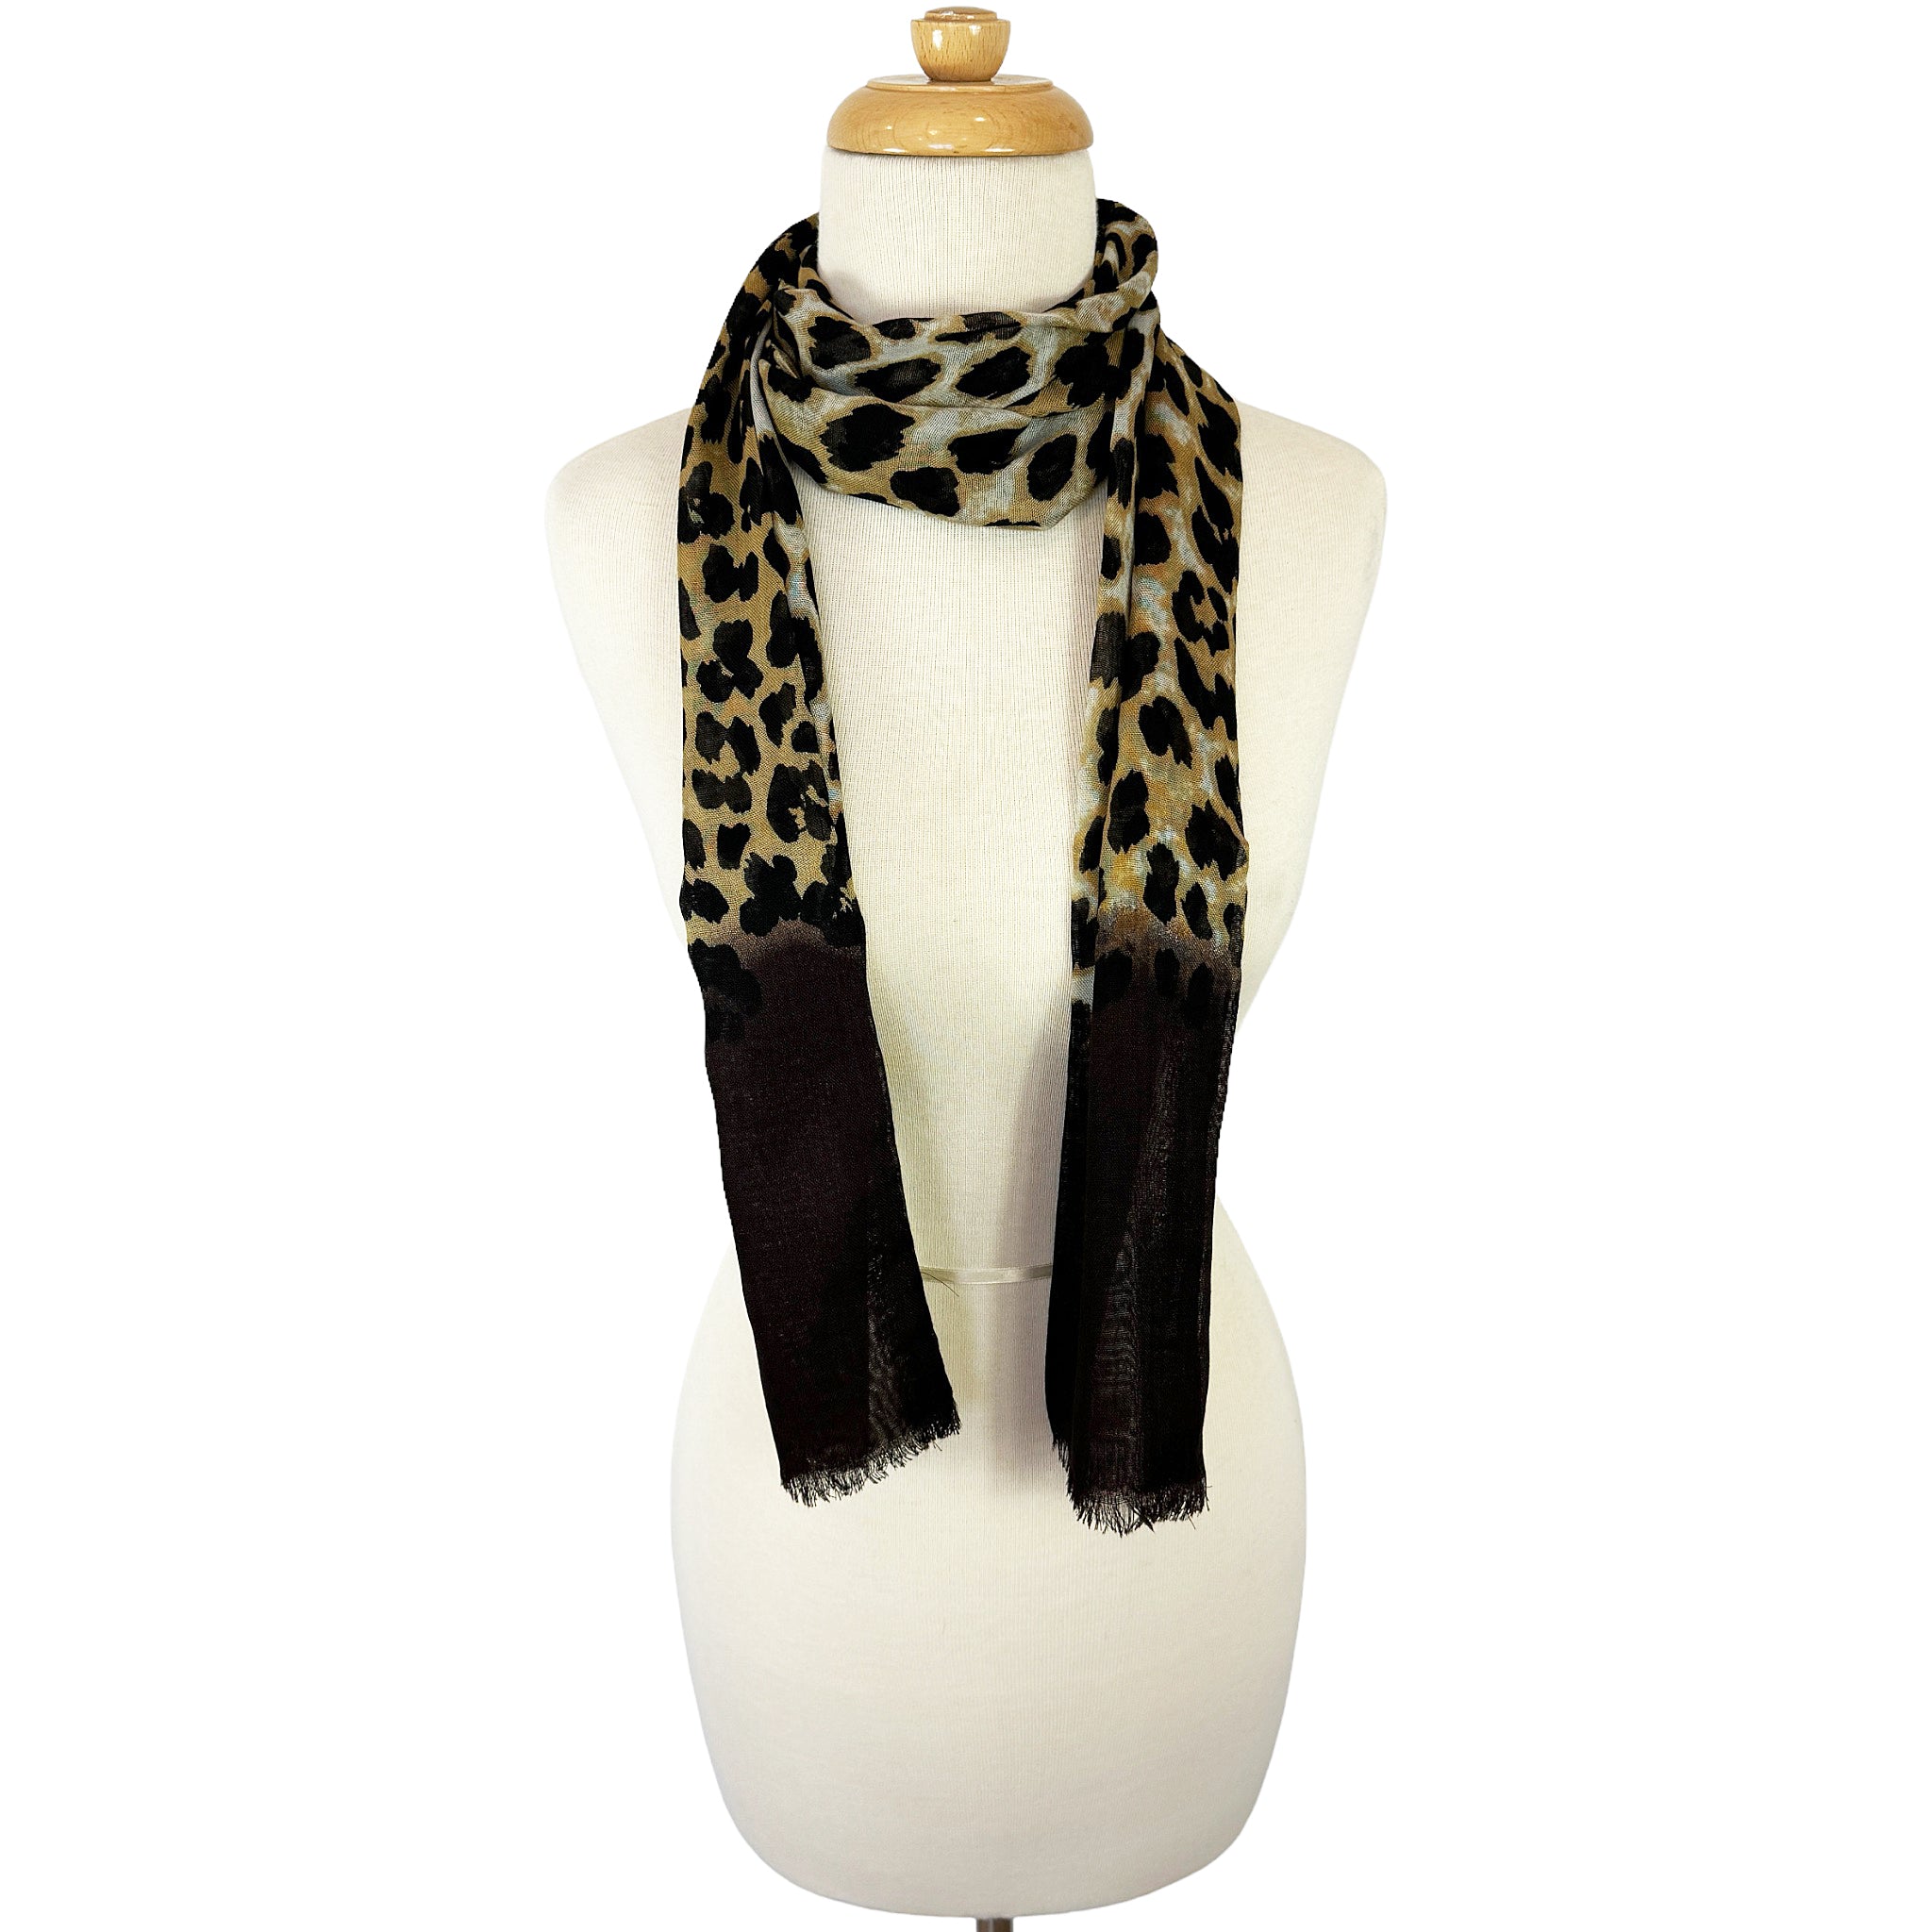 Blue Pacific Animal Print Cashmere Silk Skinny Tube Scarf in Chocolate Brown Tan